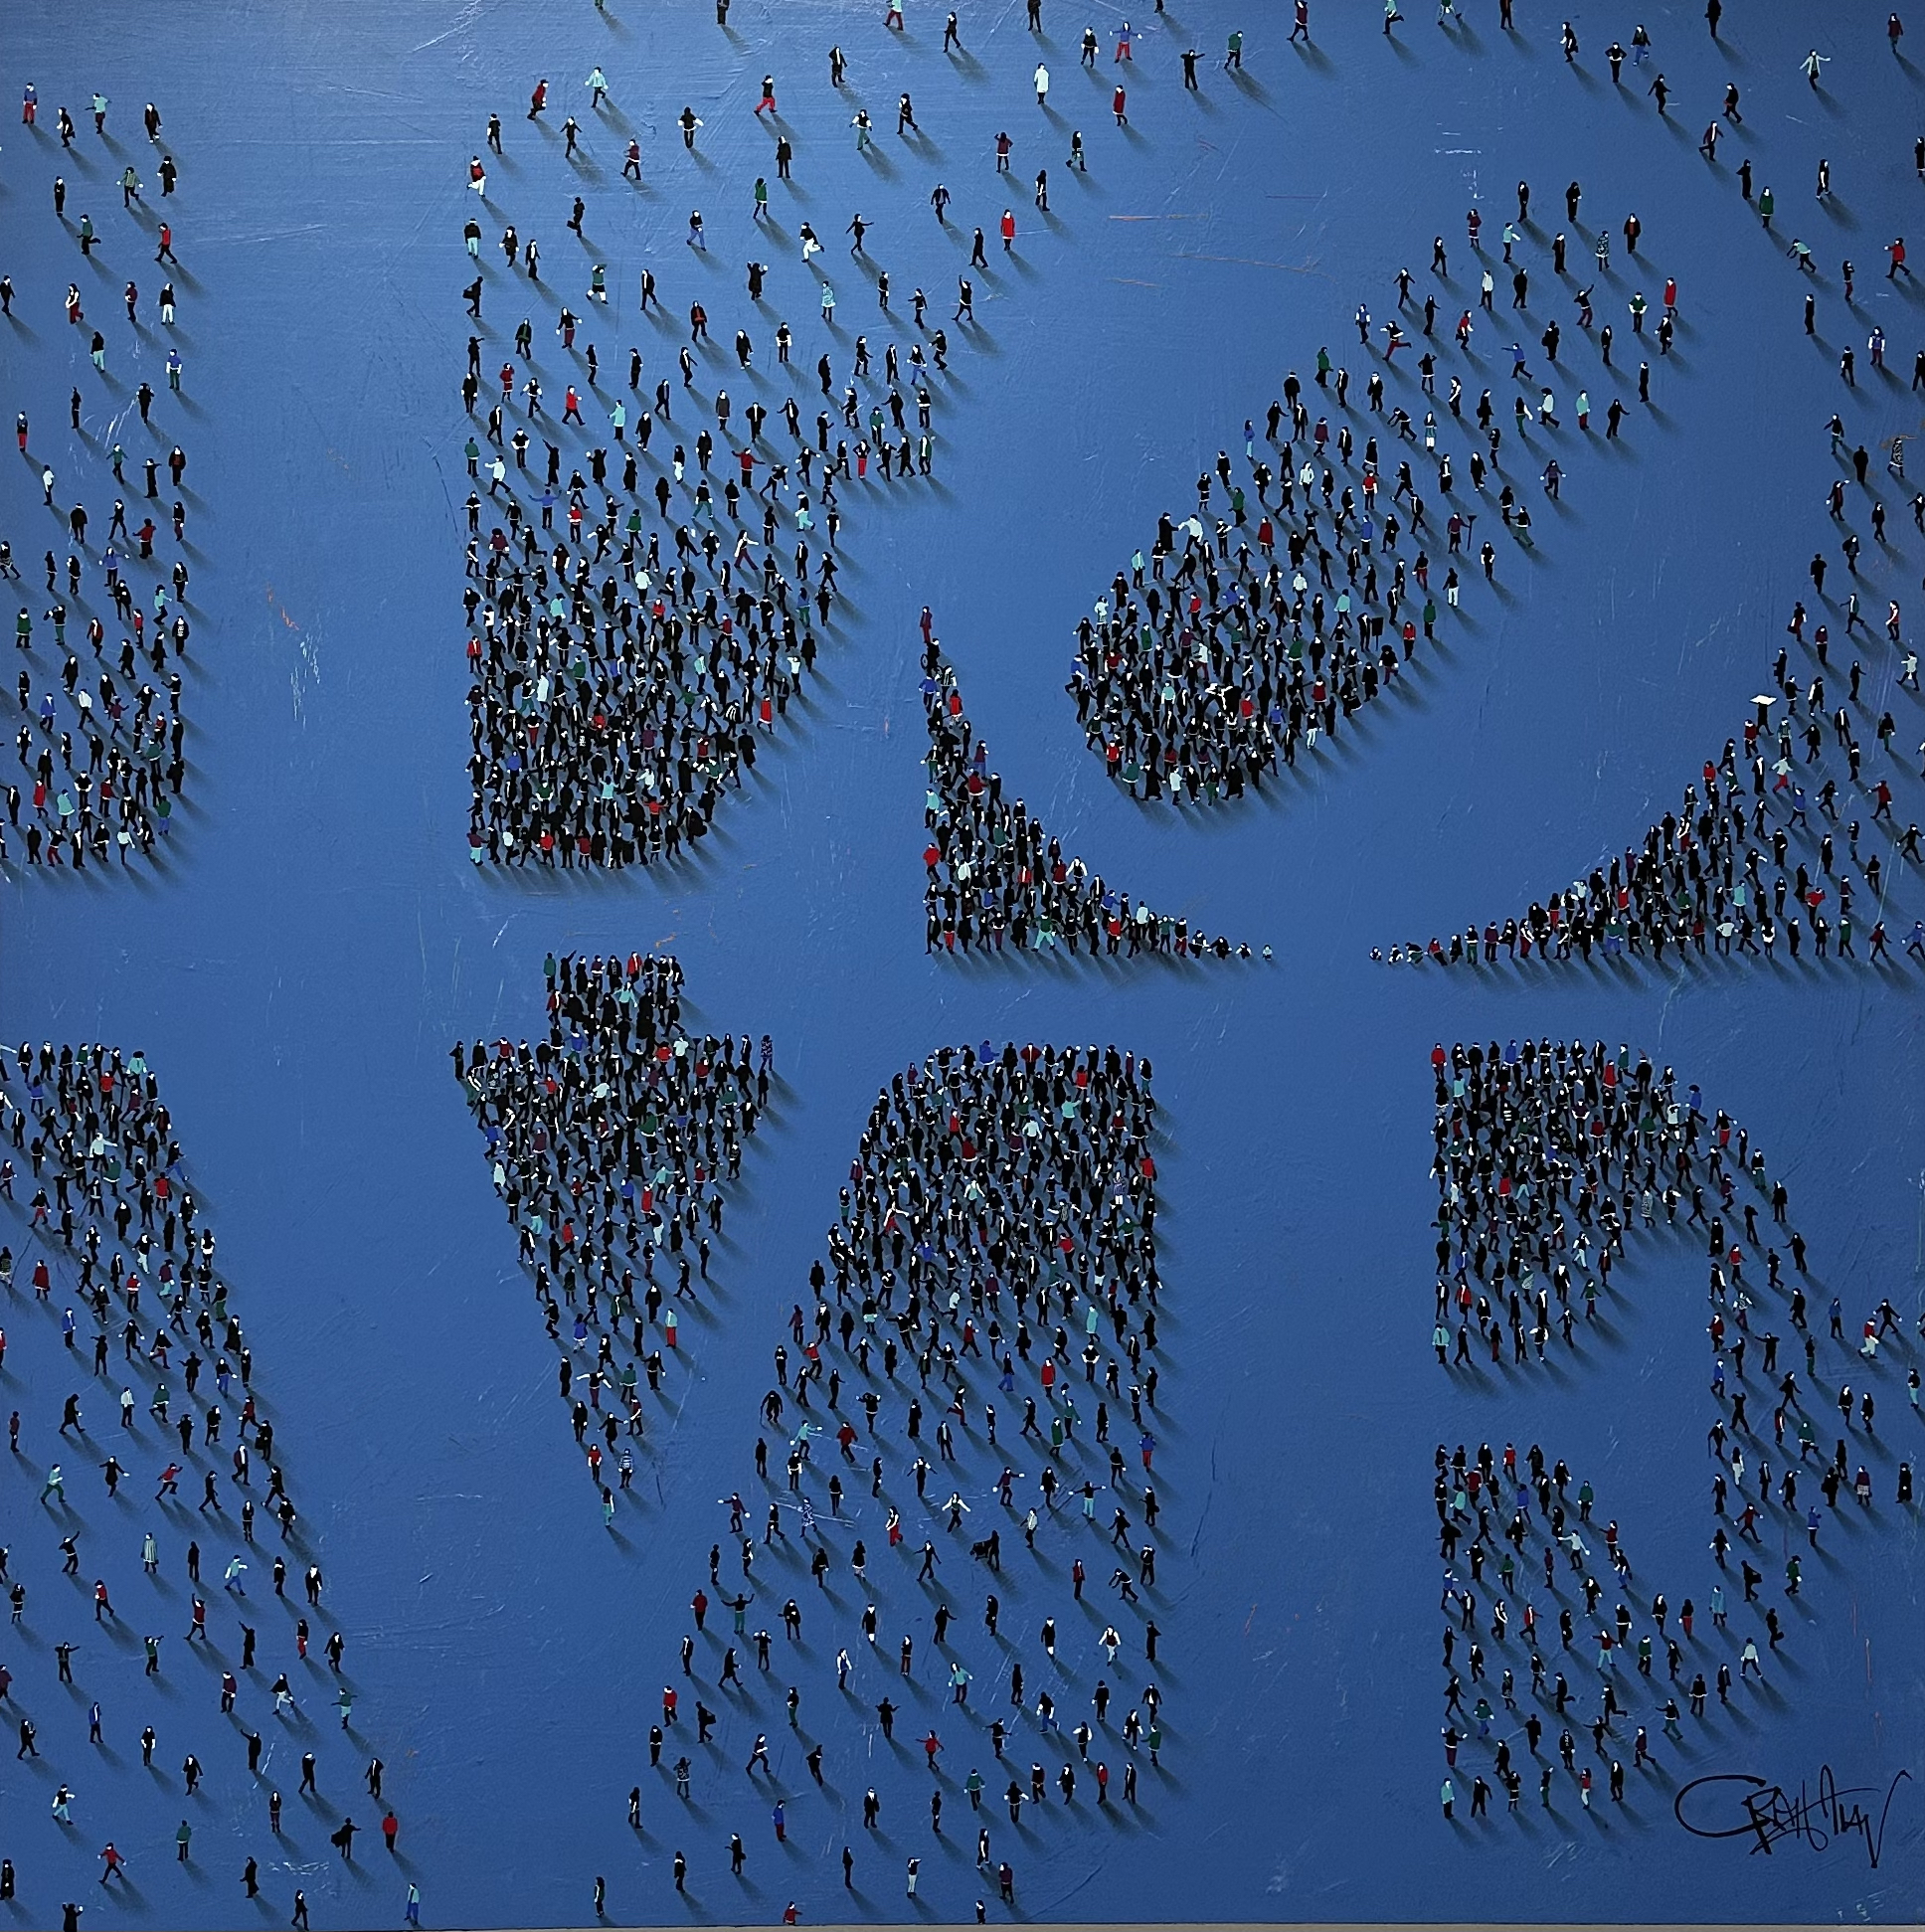 Craig Alan's Populus Conceptual piece "LOVE" (Mixed Media Original with High Gloss, 48" x 48") at The White Room Gallery